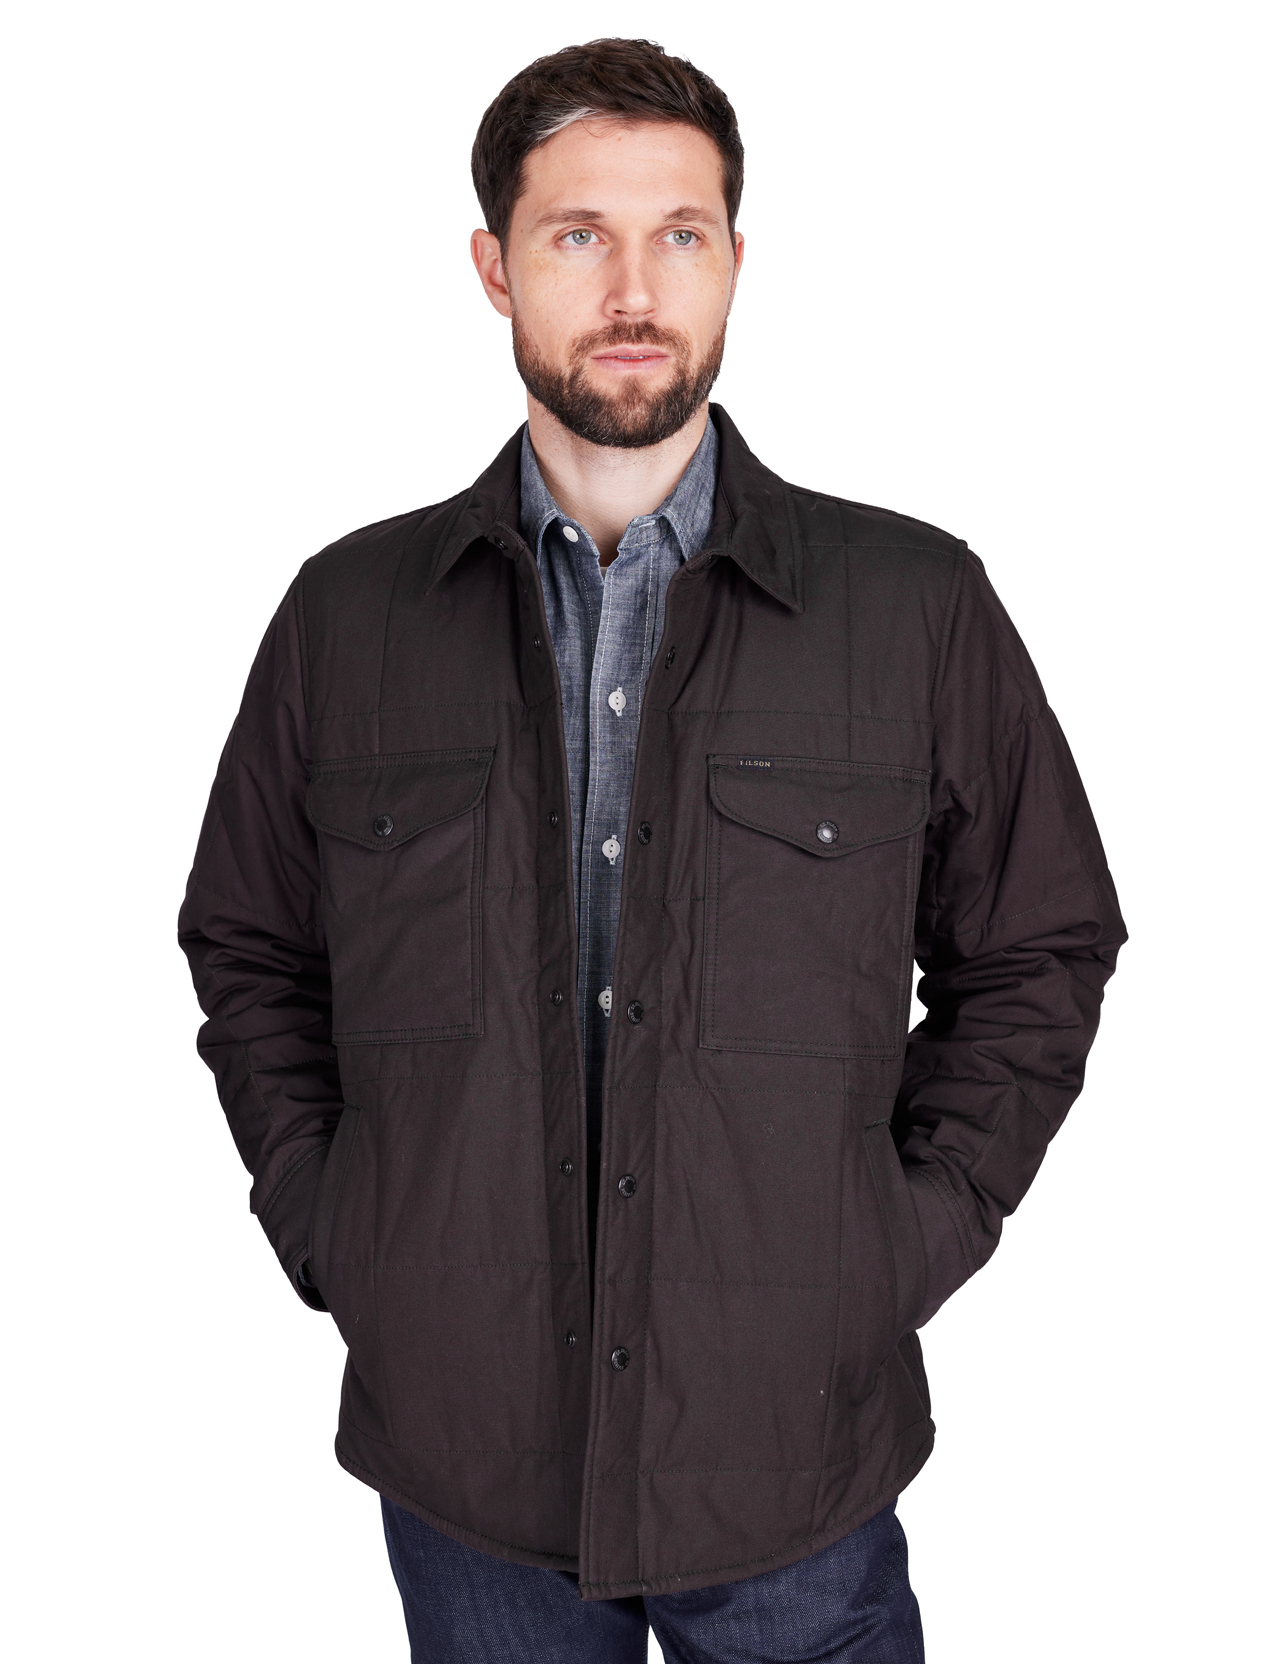 Filson---Cover-Cloth-Quilted-Jac-Shirt---Cinder-1